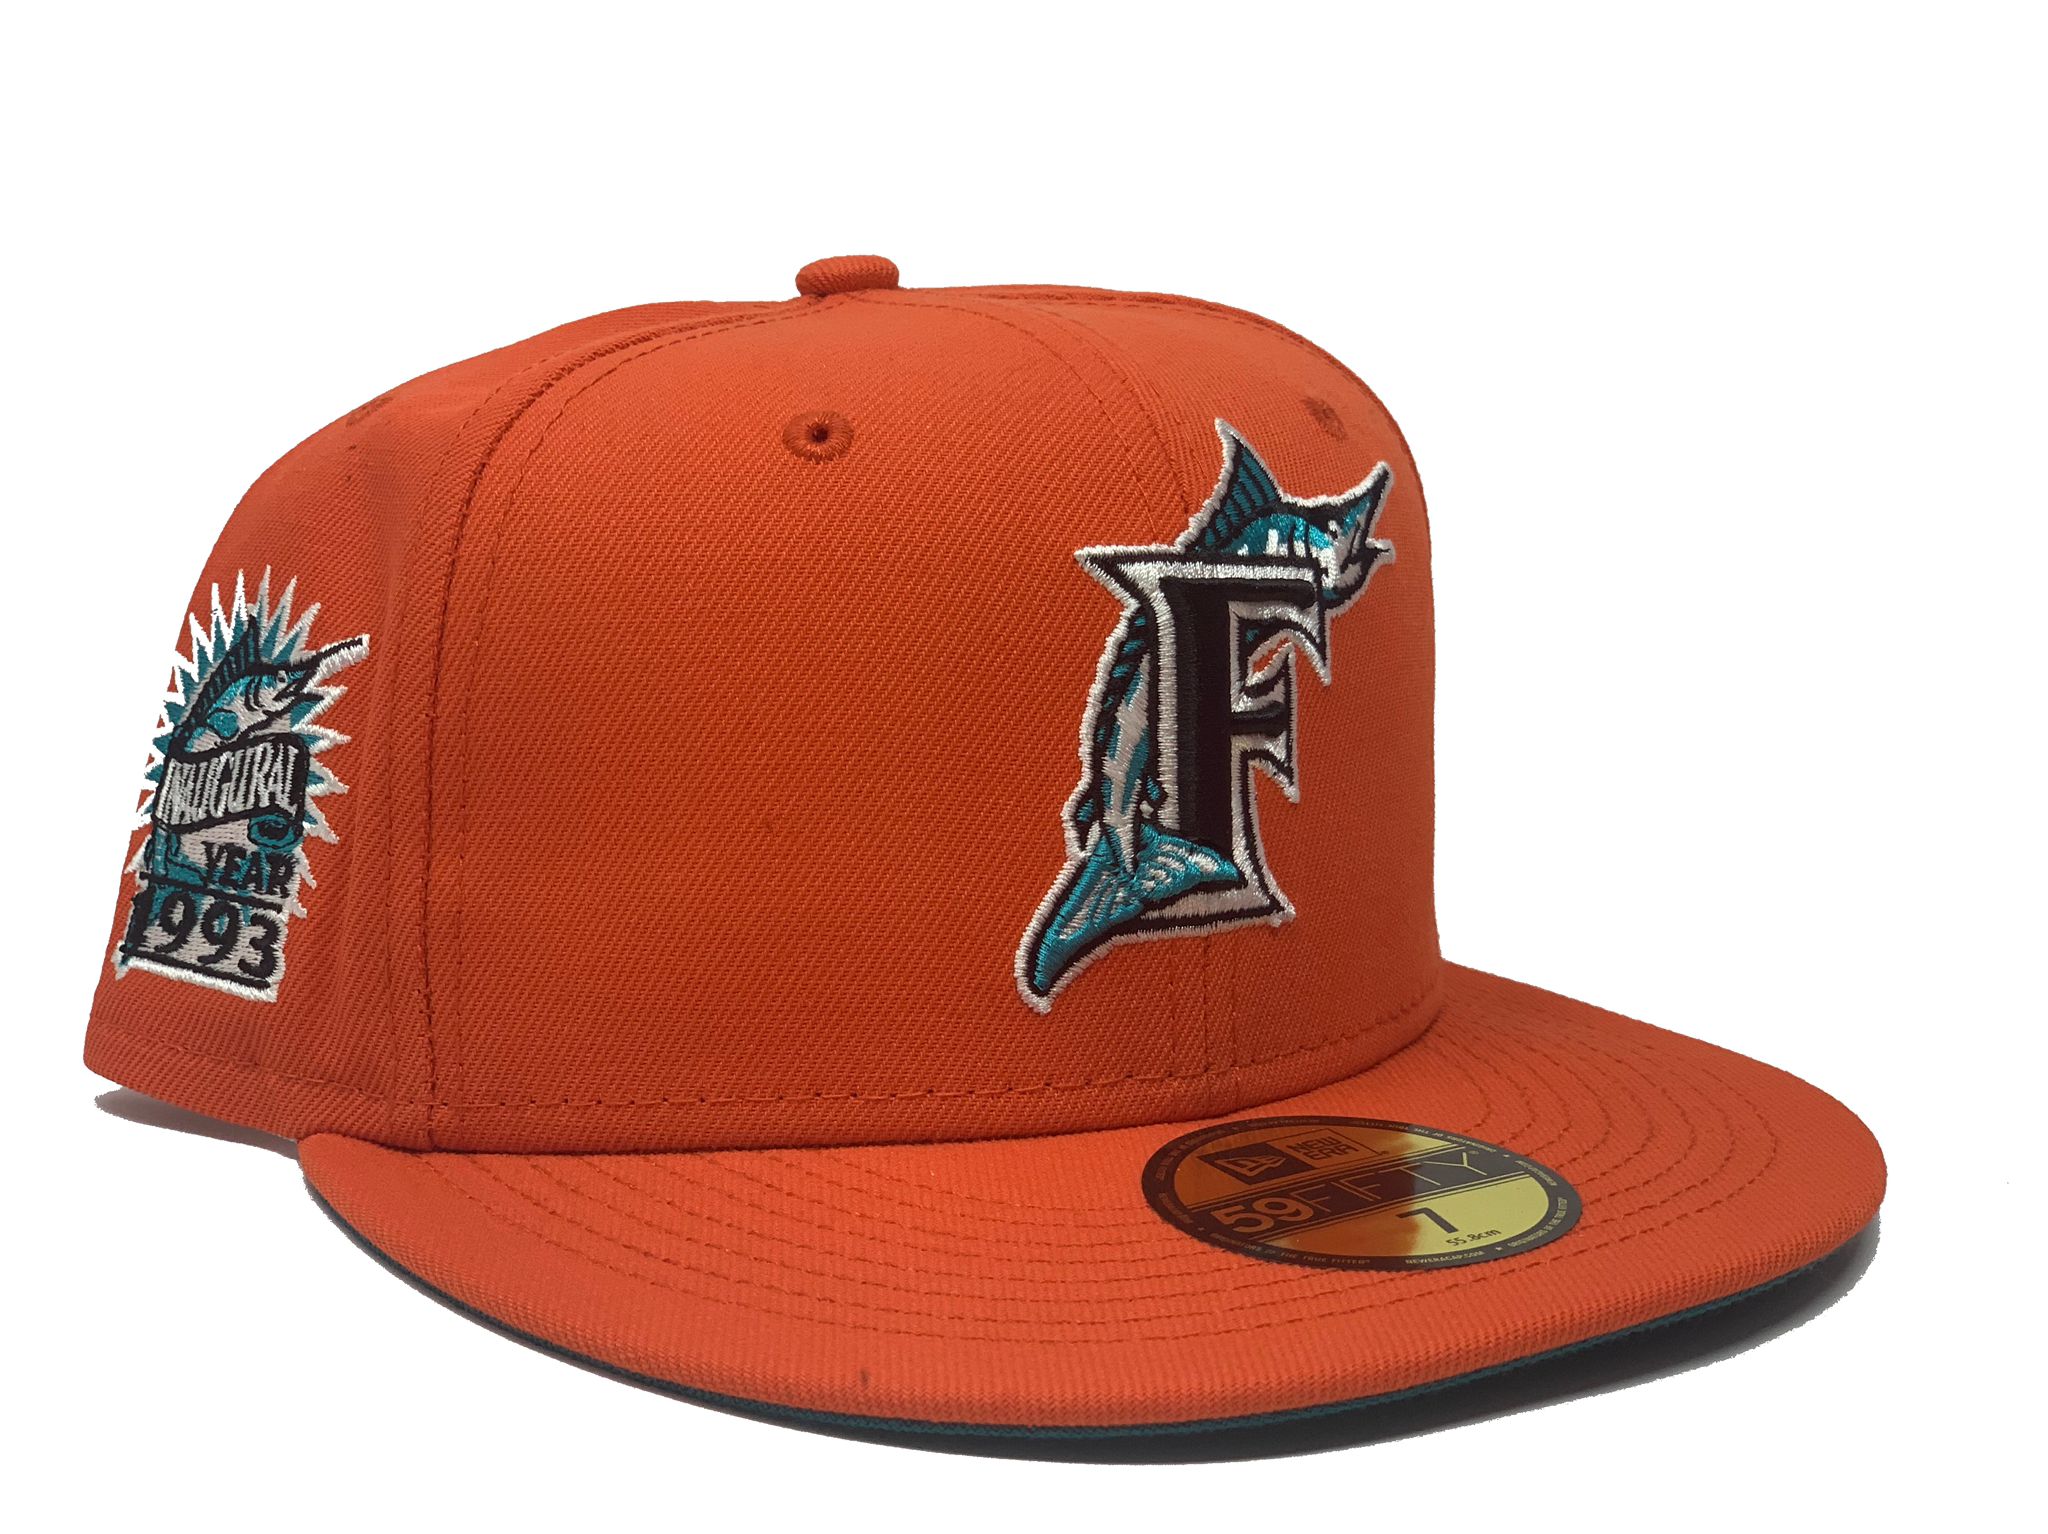 Men's New Era White/Orange Florida Marlins Cooperstown Collection Flamingo 59FIFTY Fitted Hat